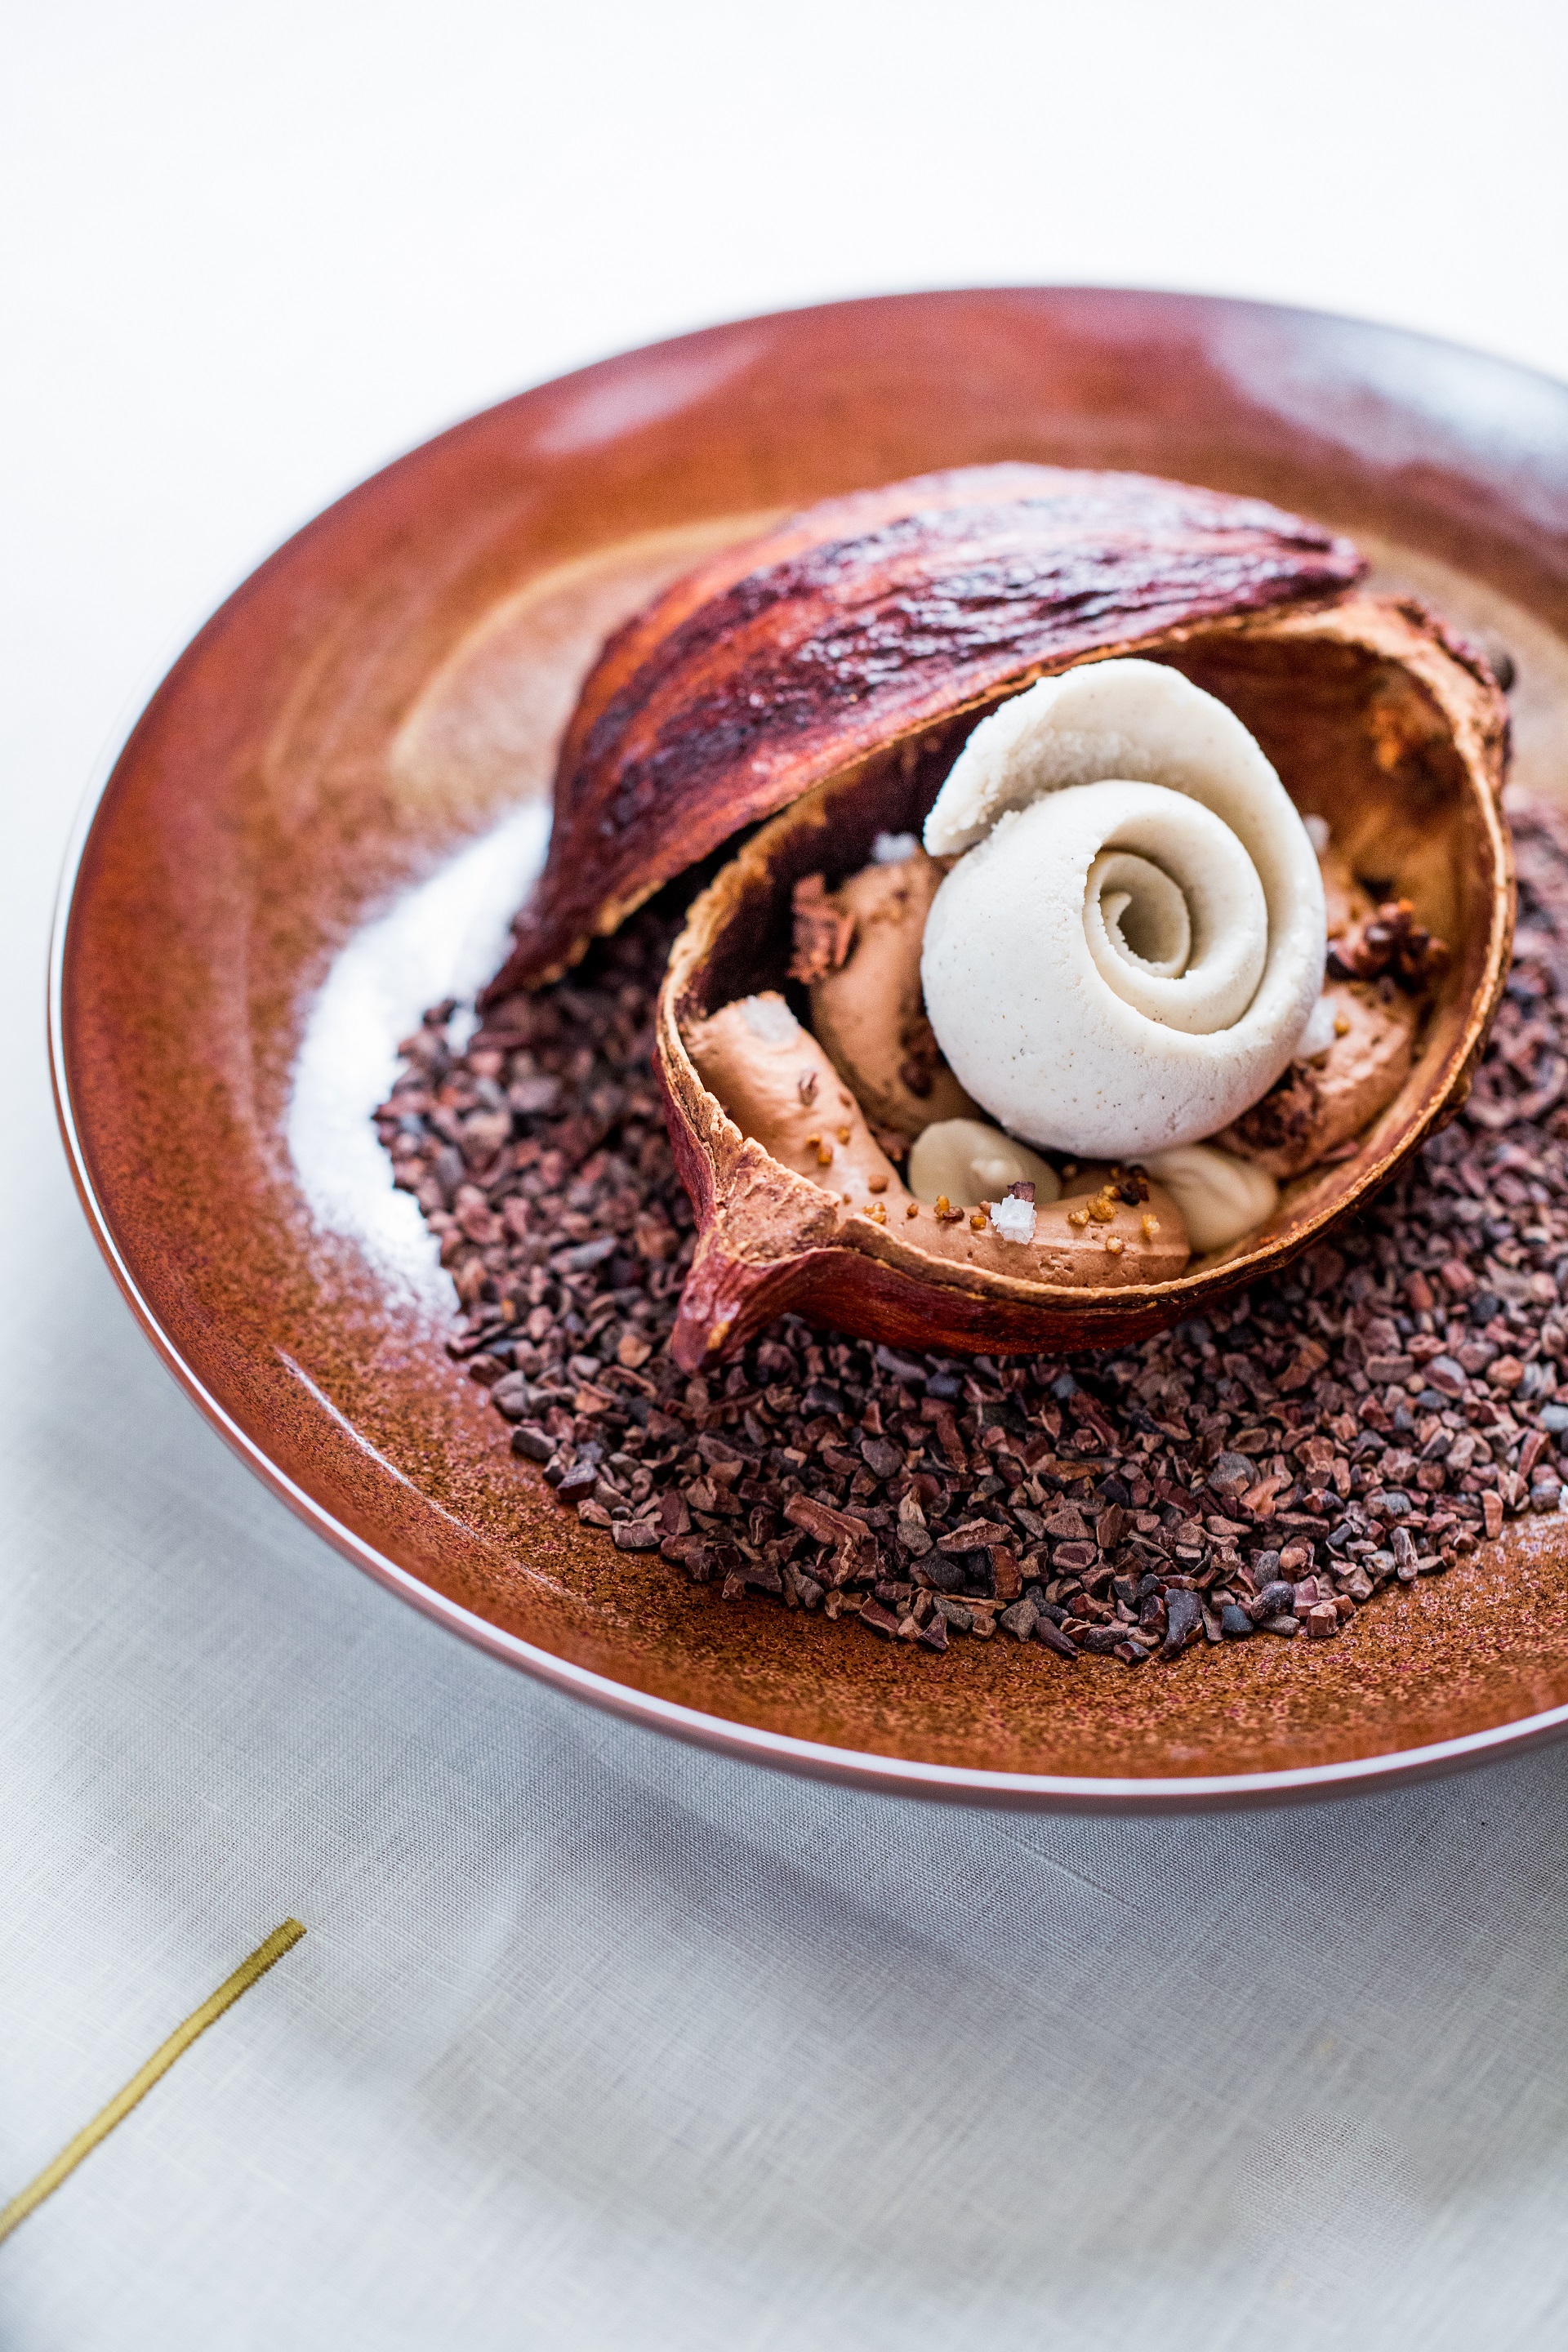 Alain Ducasse Wine Dinner November 2019 Coffee and chocolate from our Manufacture in Paris, toasted buckwheat